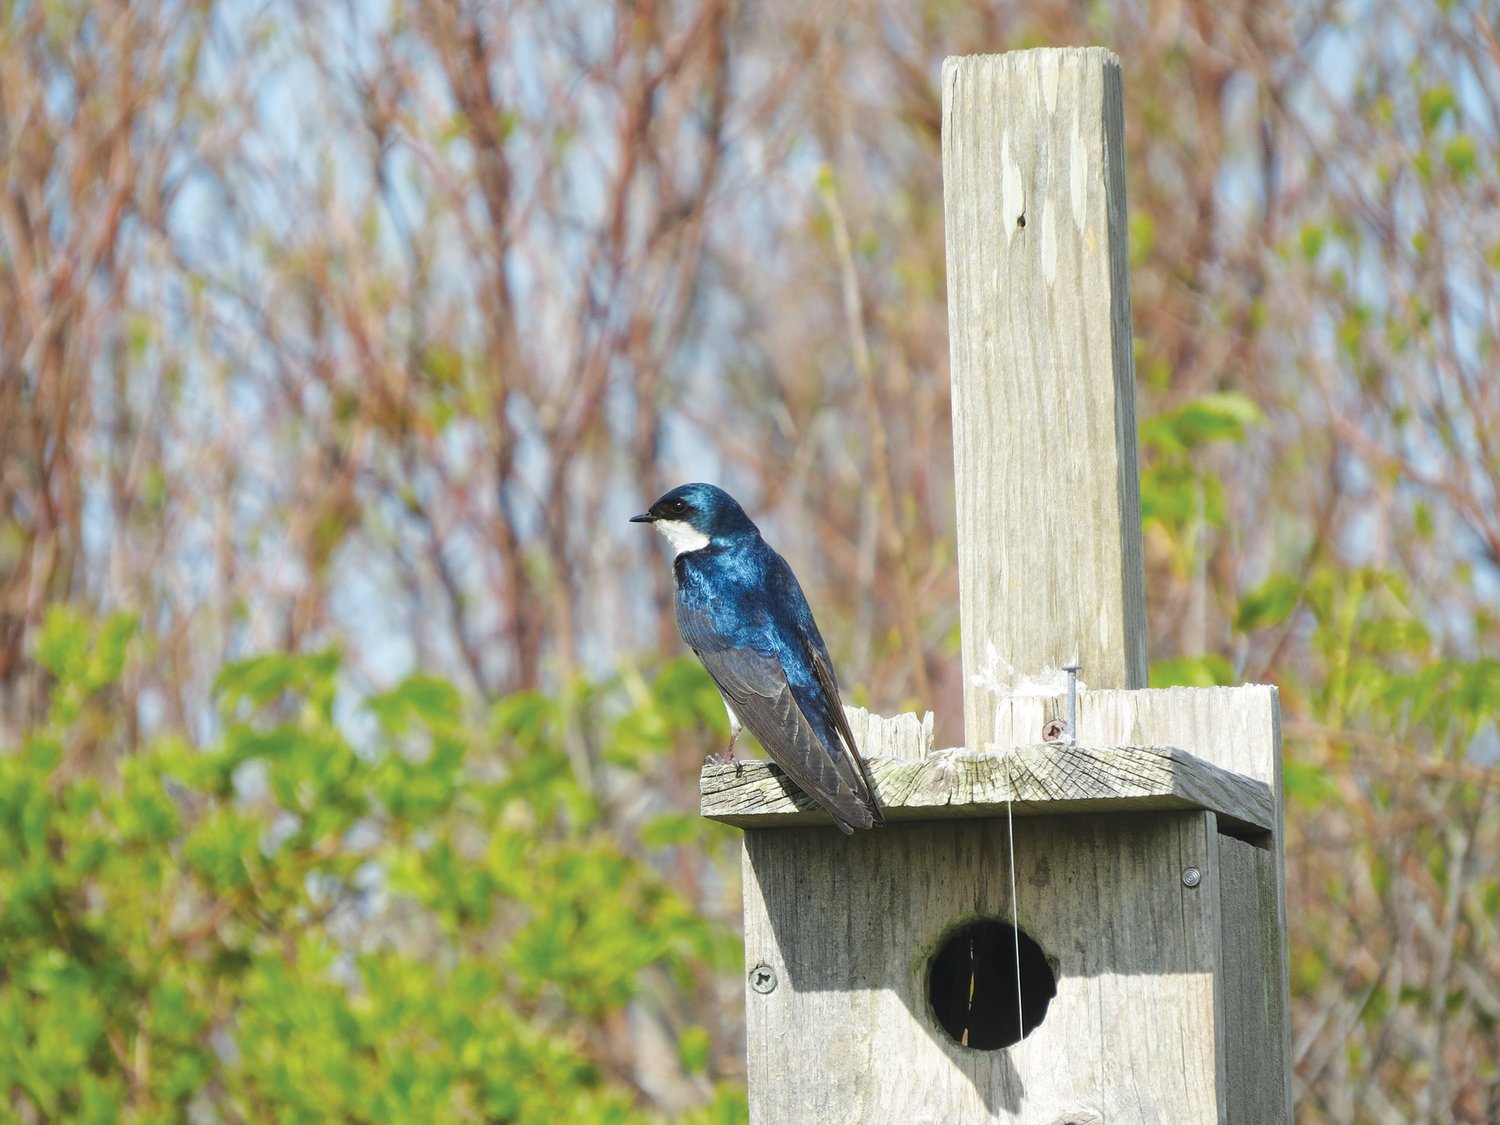 Tree Swallows, some of which will stay to nest, were a welcome sight this week.